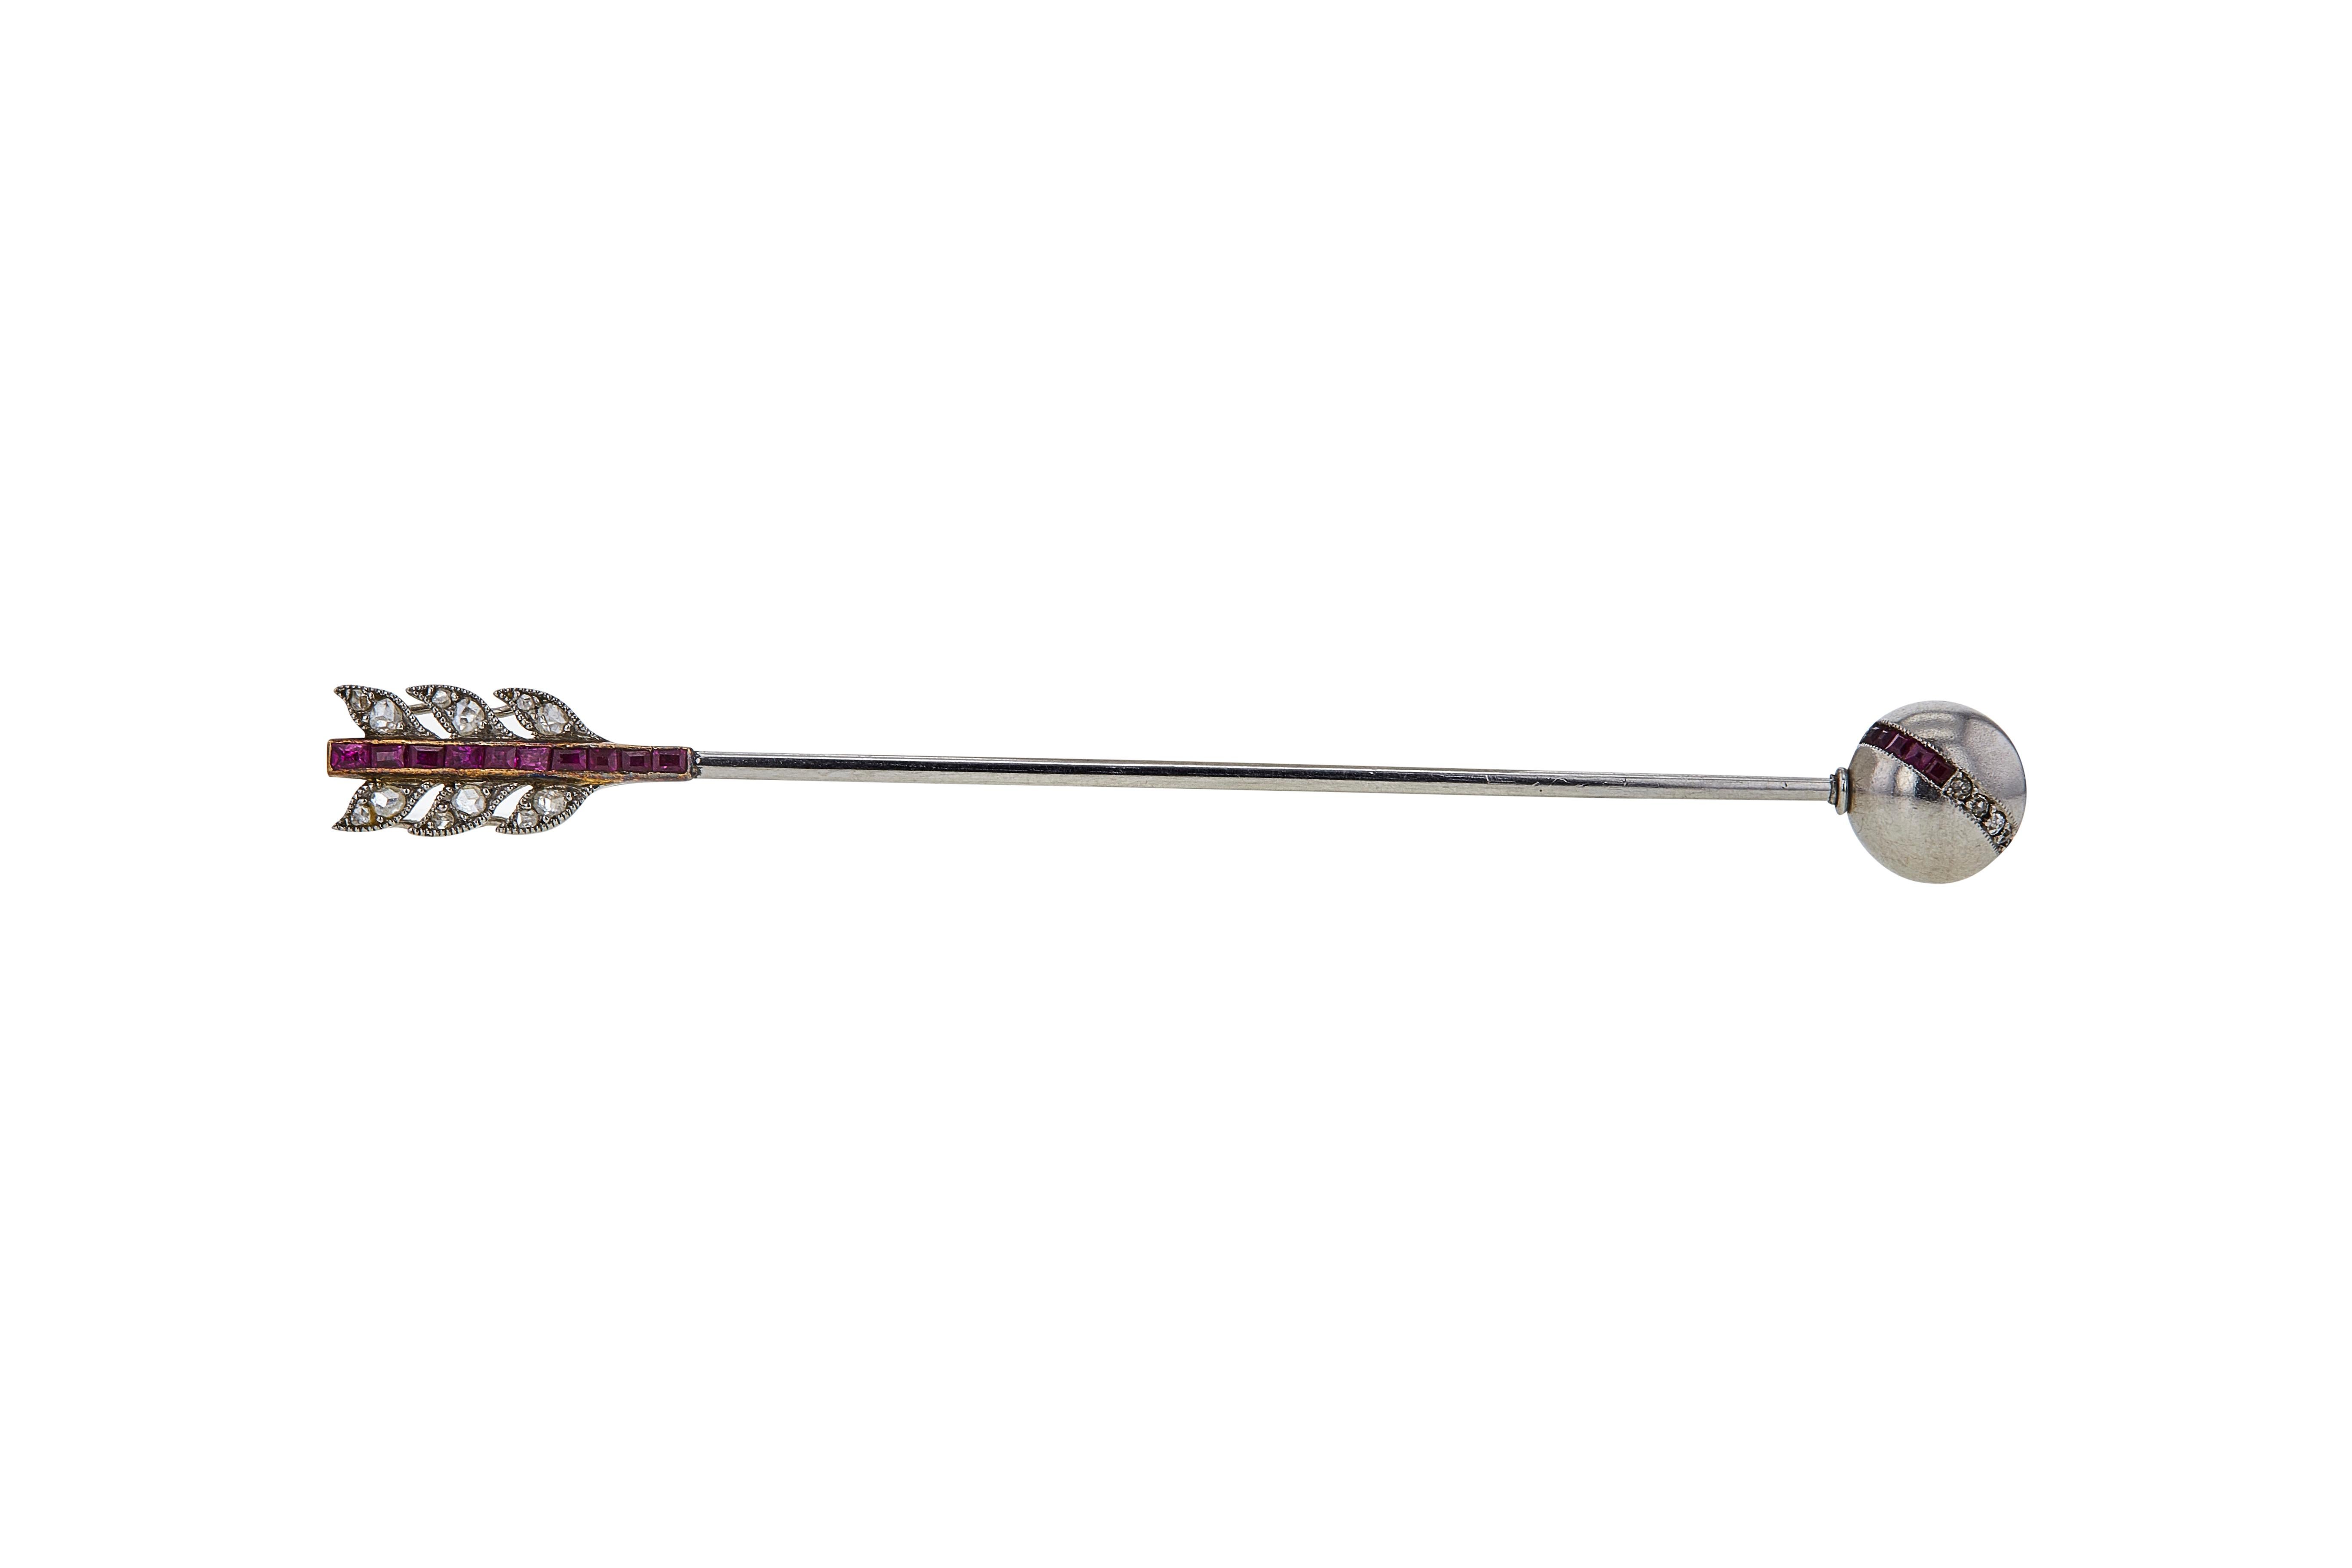 Authentic Art Deco Cartier jabot pin designed as an arrow with a spherical tip. Crafted in platinum and 18 karat yellow gold, the jabot pin is elegantly set with calibrated rubies and approximately 22 rose-cut diamonds weighing an estimated 0.20